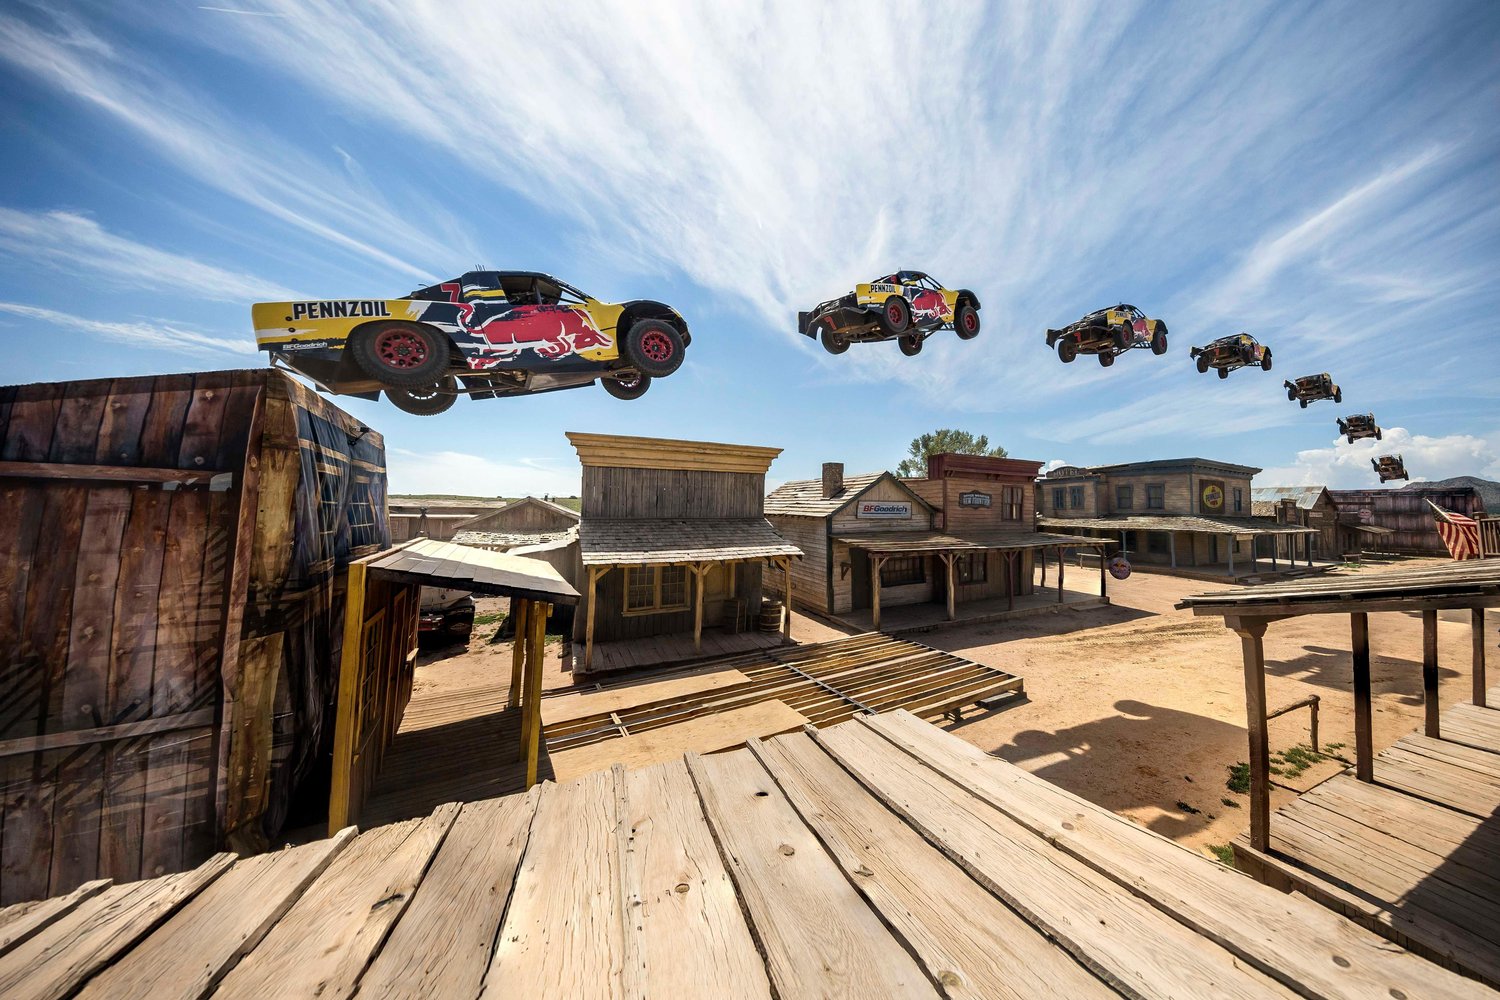 Bryce Menzies jumps at Red Bull New Frontier at Bonanza Creek Ranch in Santa Fe, New Mexico, USA on 25 August 2016.